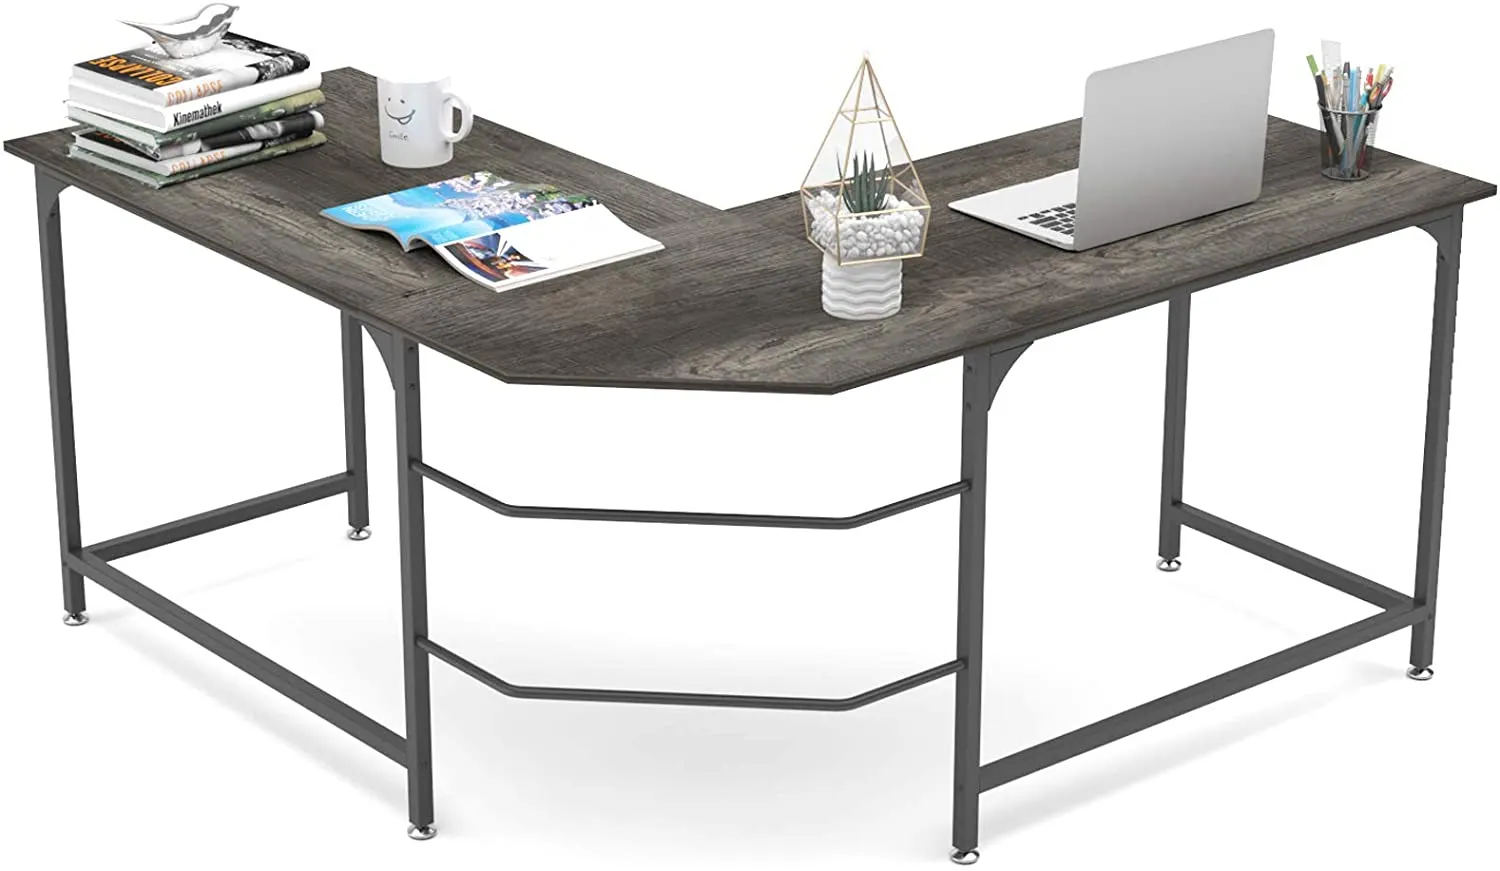 A beautiful and large L shaped corner desk can be a perfect workstation for your home office.